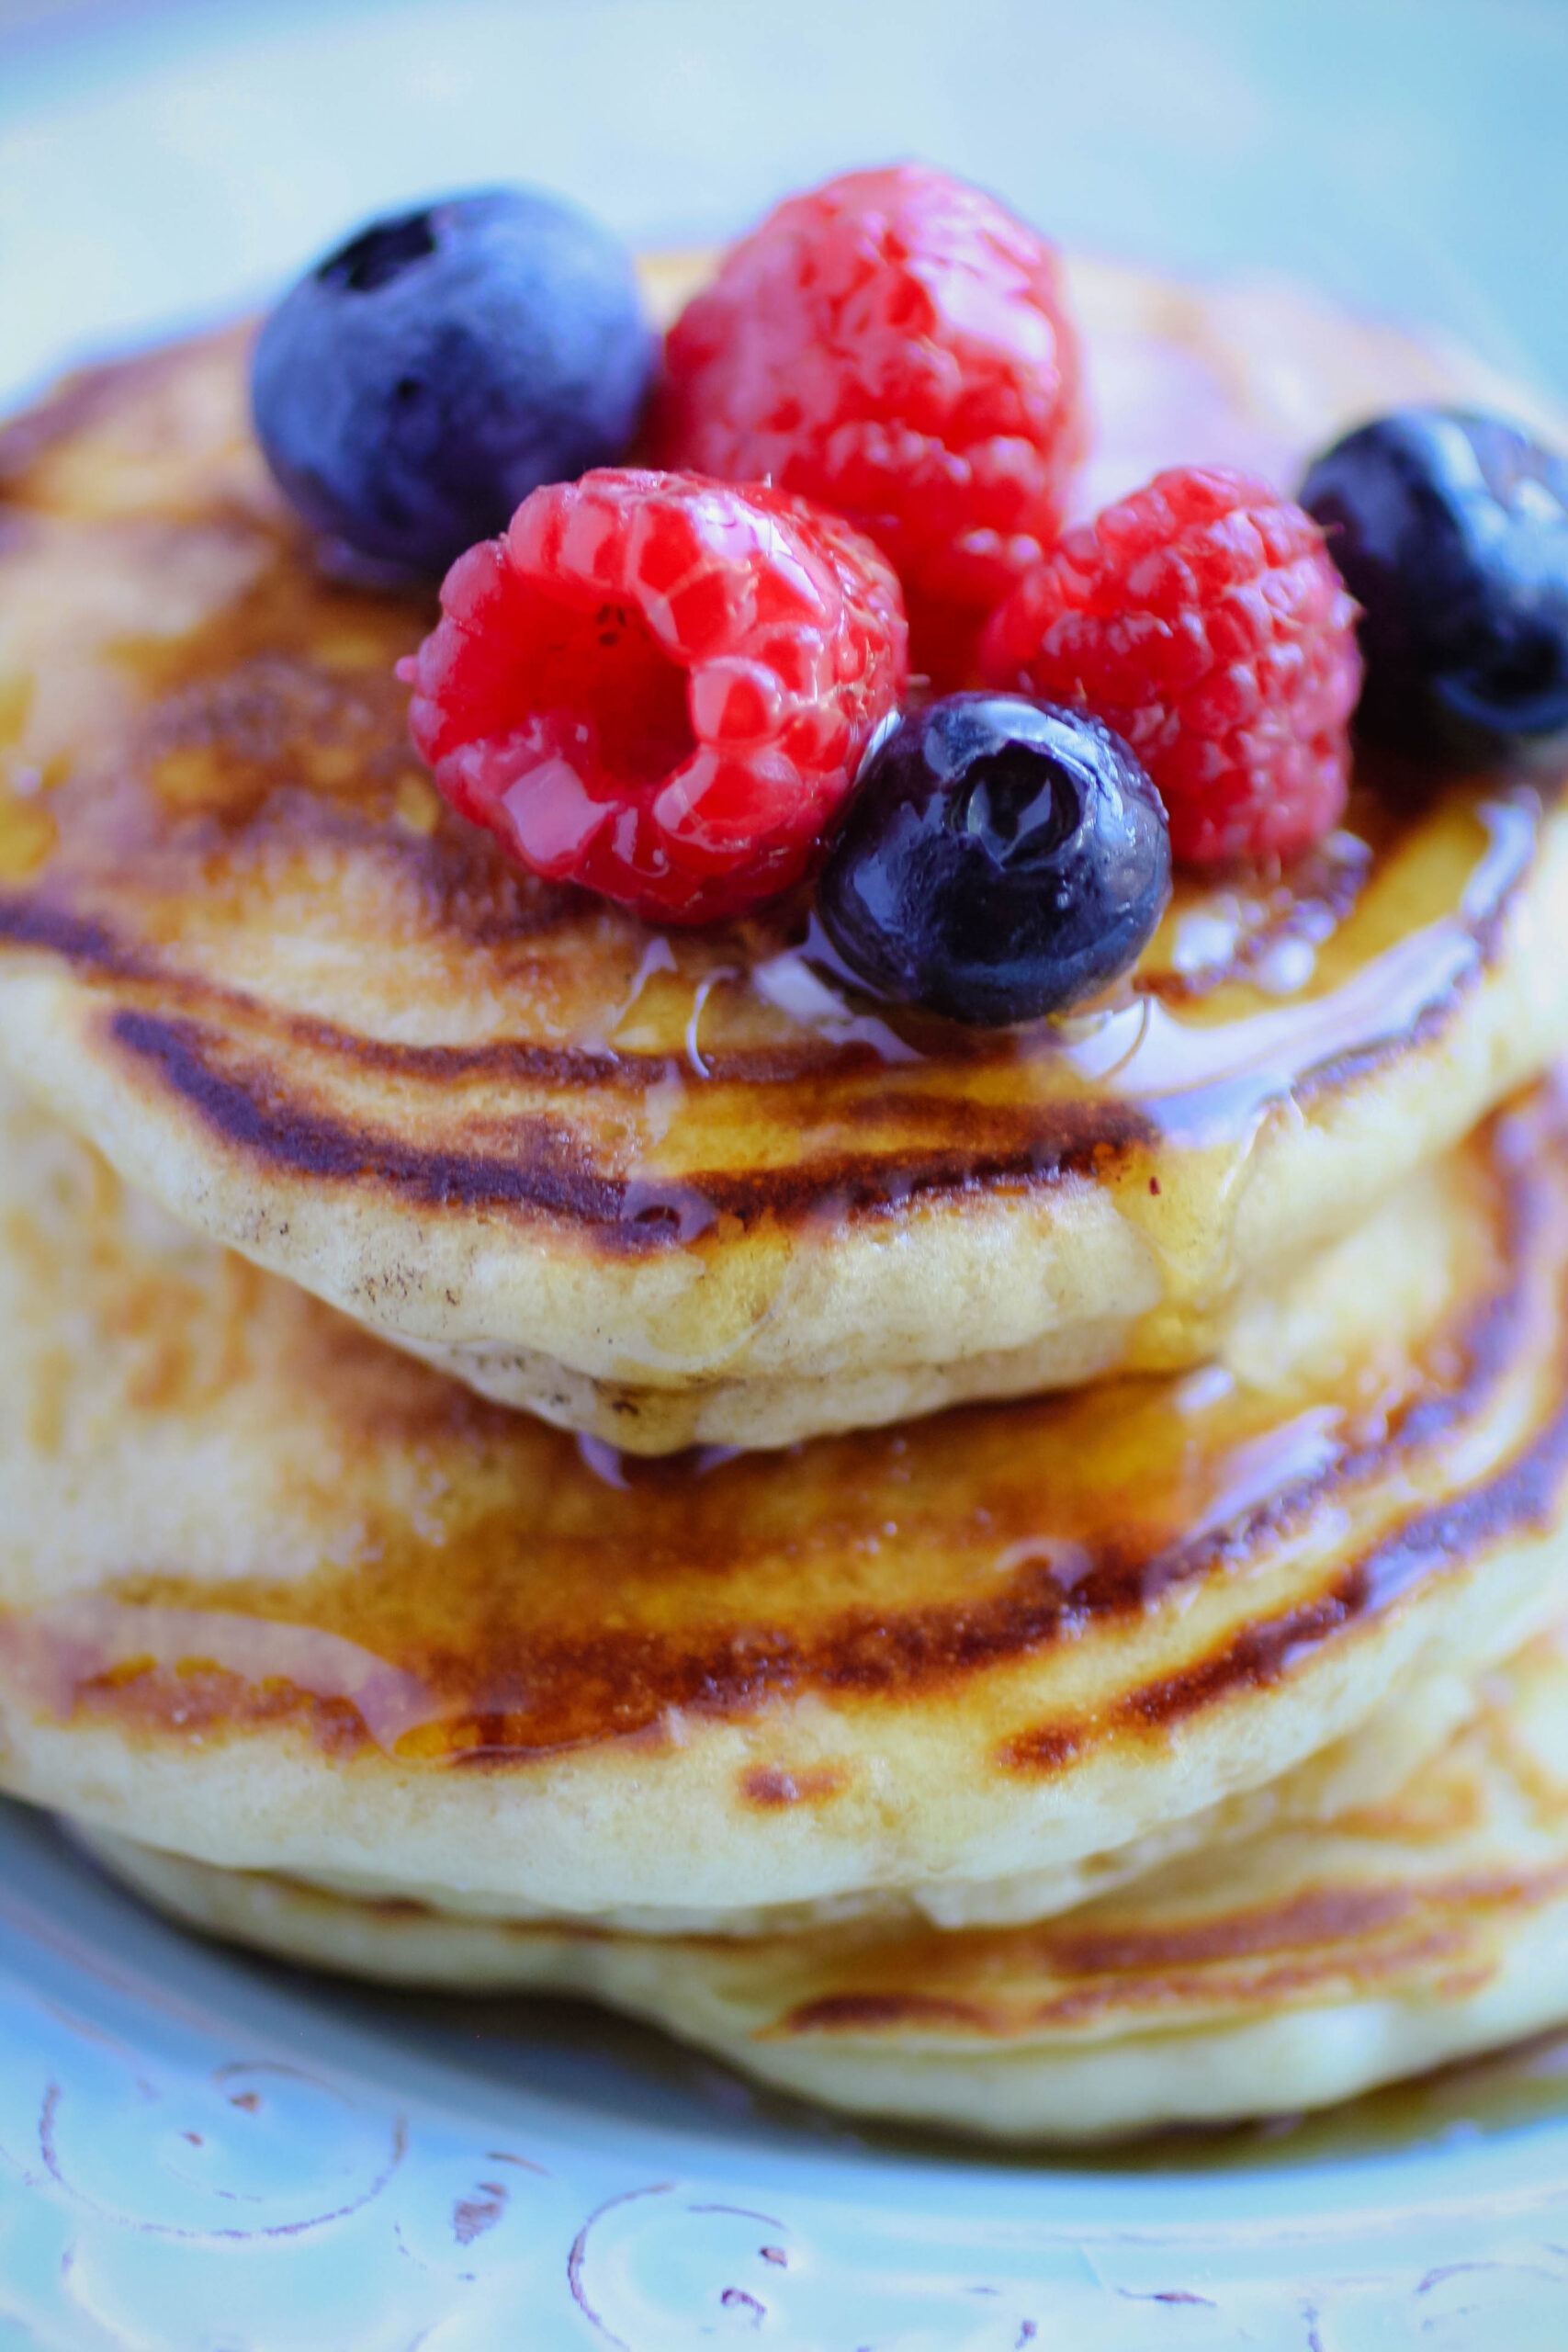 Queen Elizabeth II’s Drop Scones (Scottish Pancakes) topped with fresh fruit and syrup makes an amazing breakfast or breakfast-for-dinner!